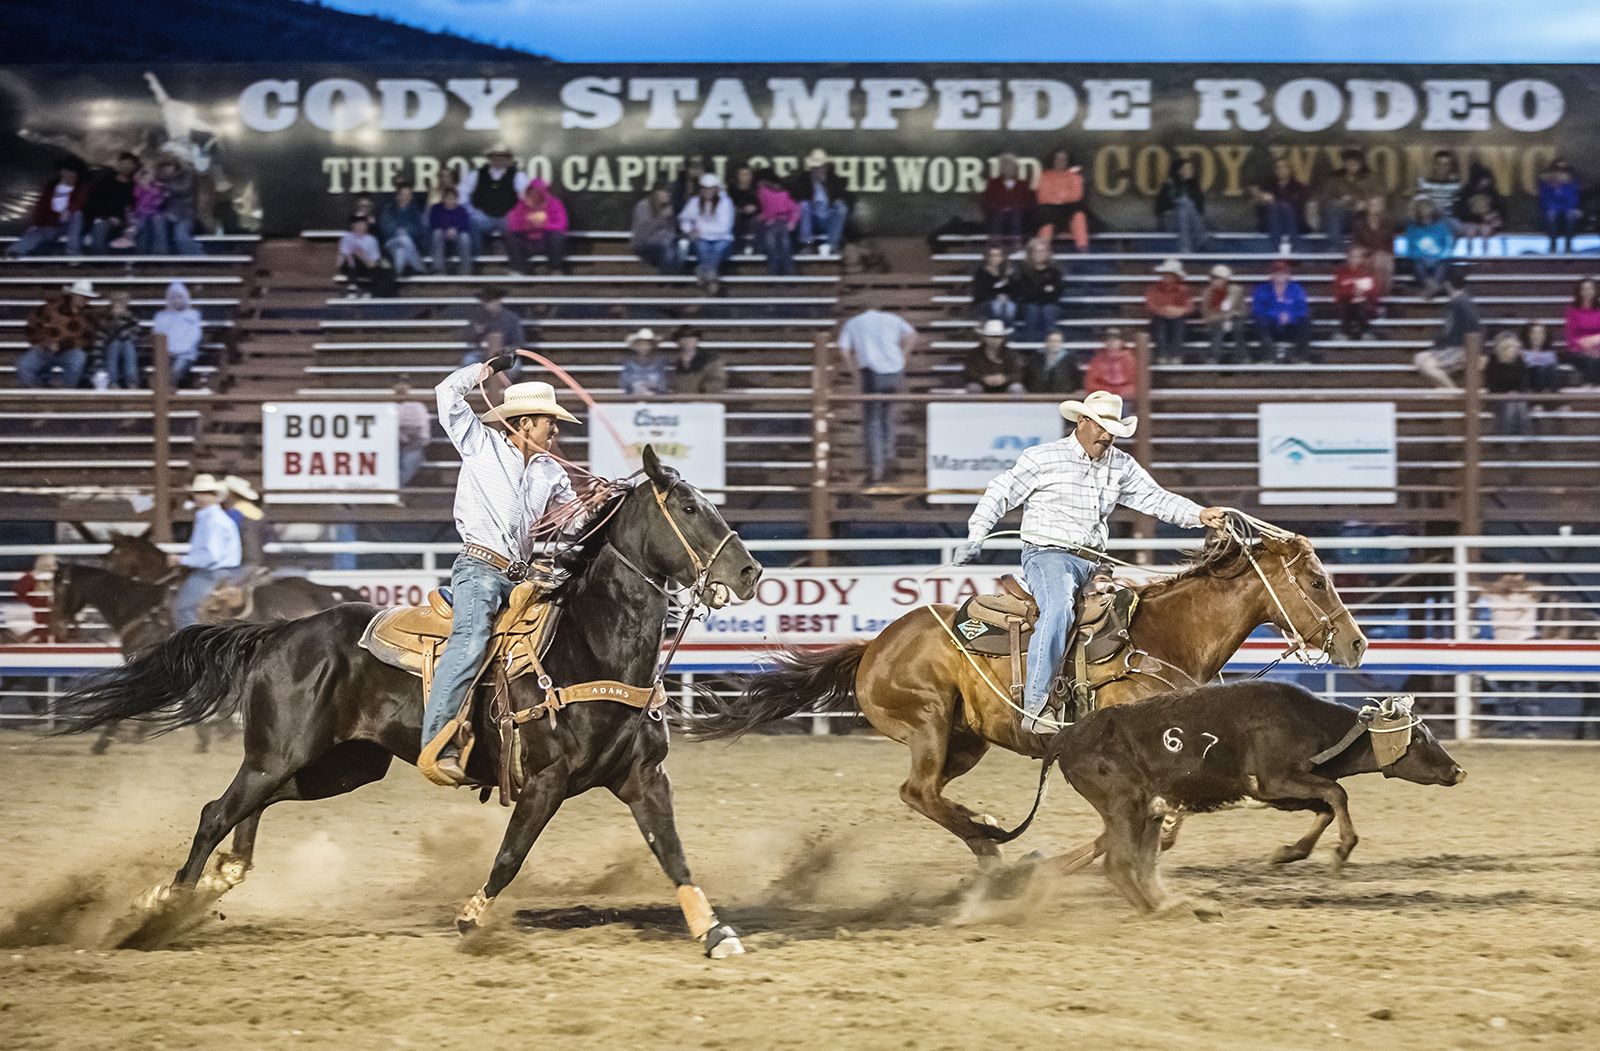 What Is The Significance Of Rodeos In Wyoming's Culture?